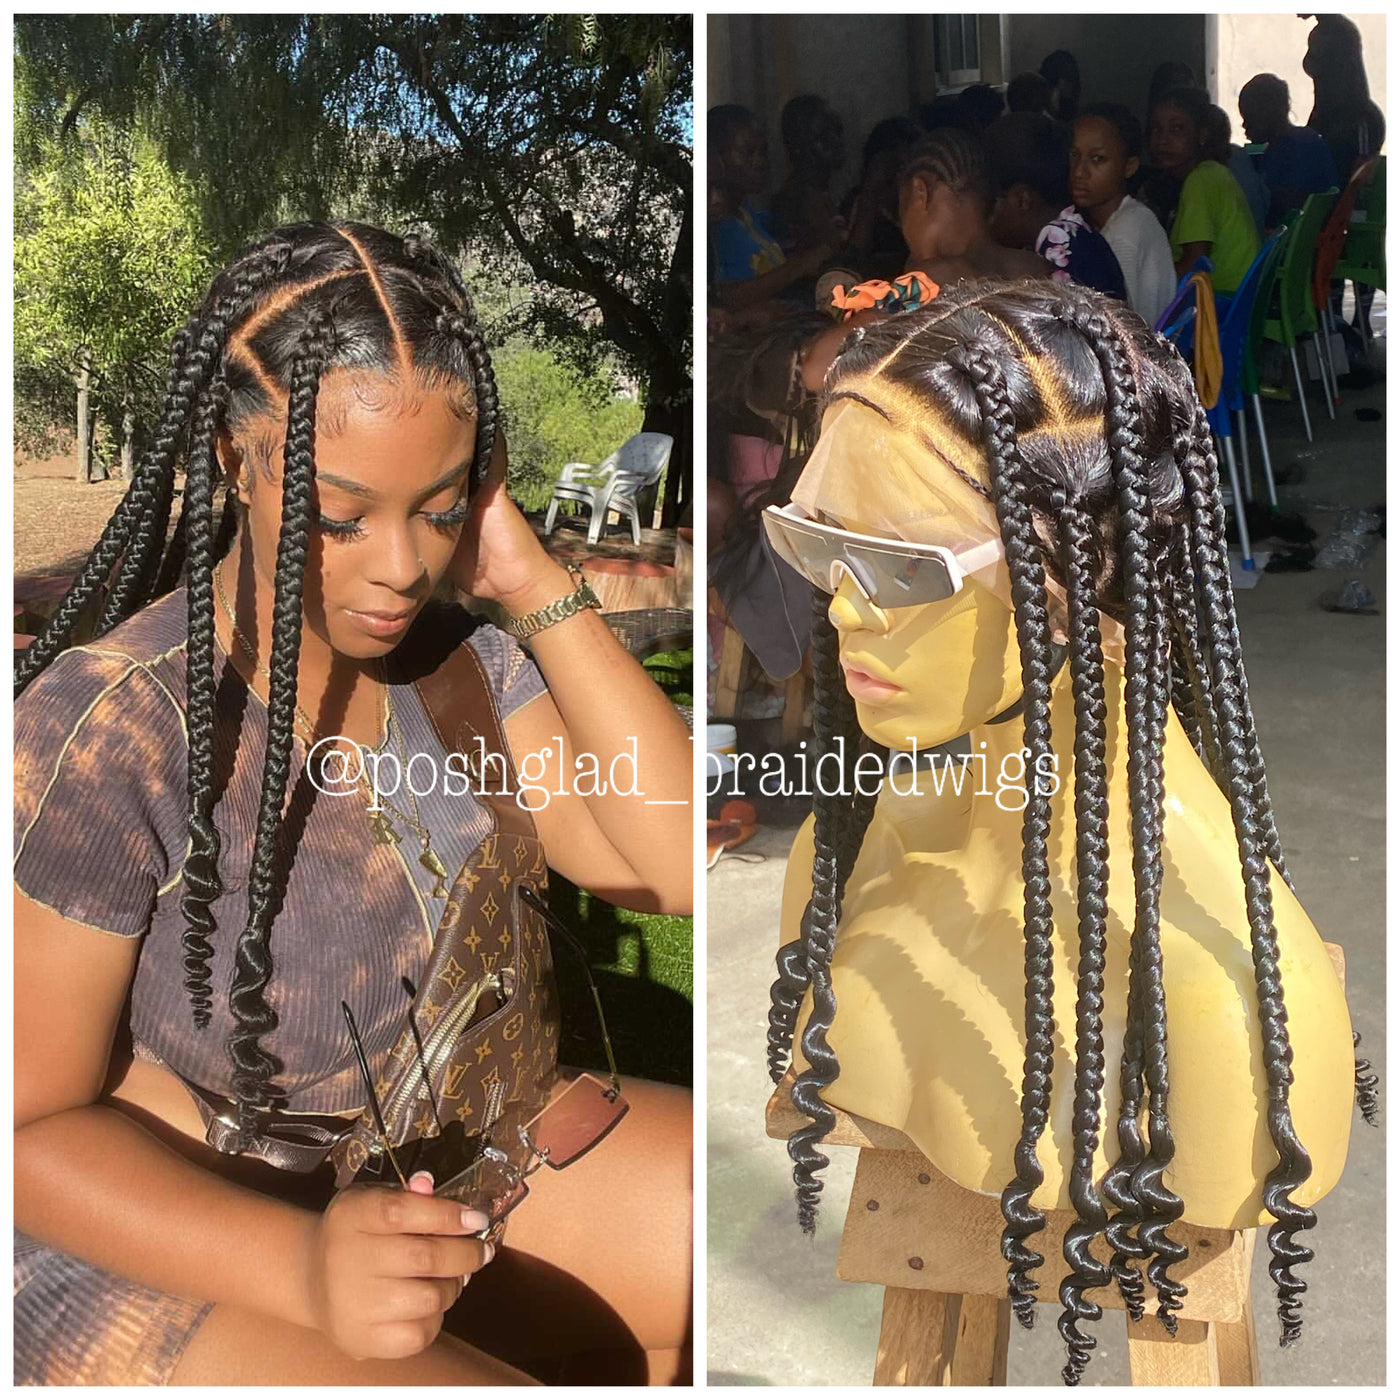 Poshglad Braided Wigs Provides the Ultimate Solution for Black